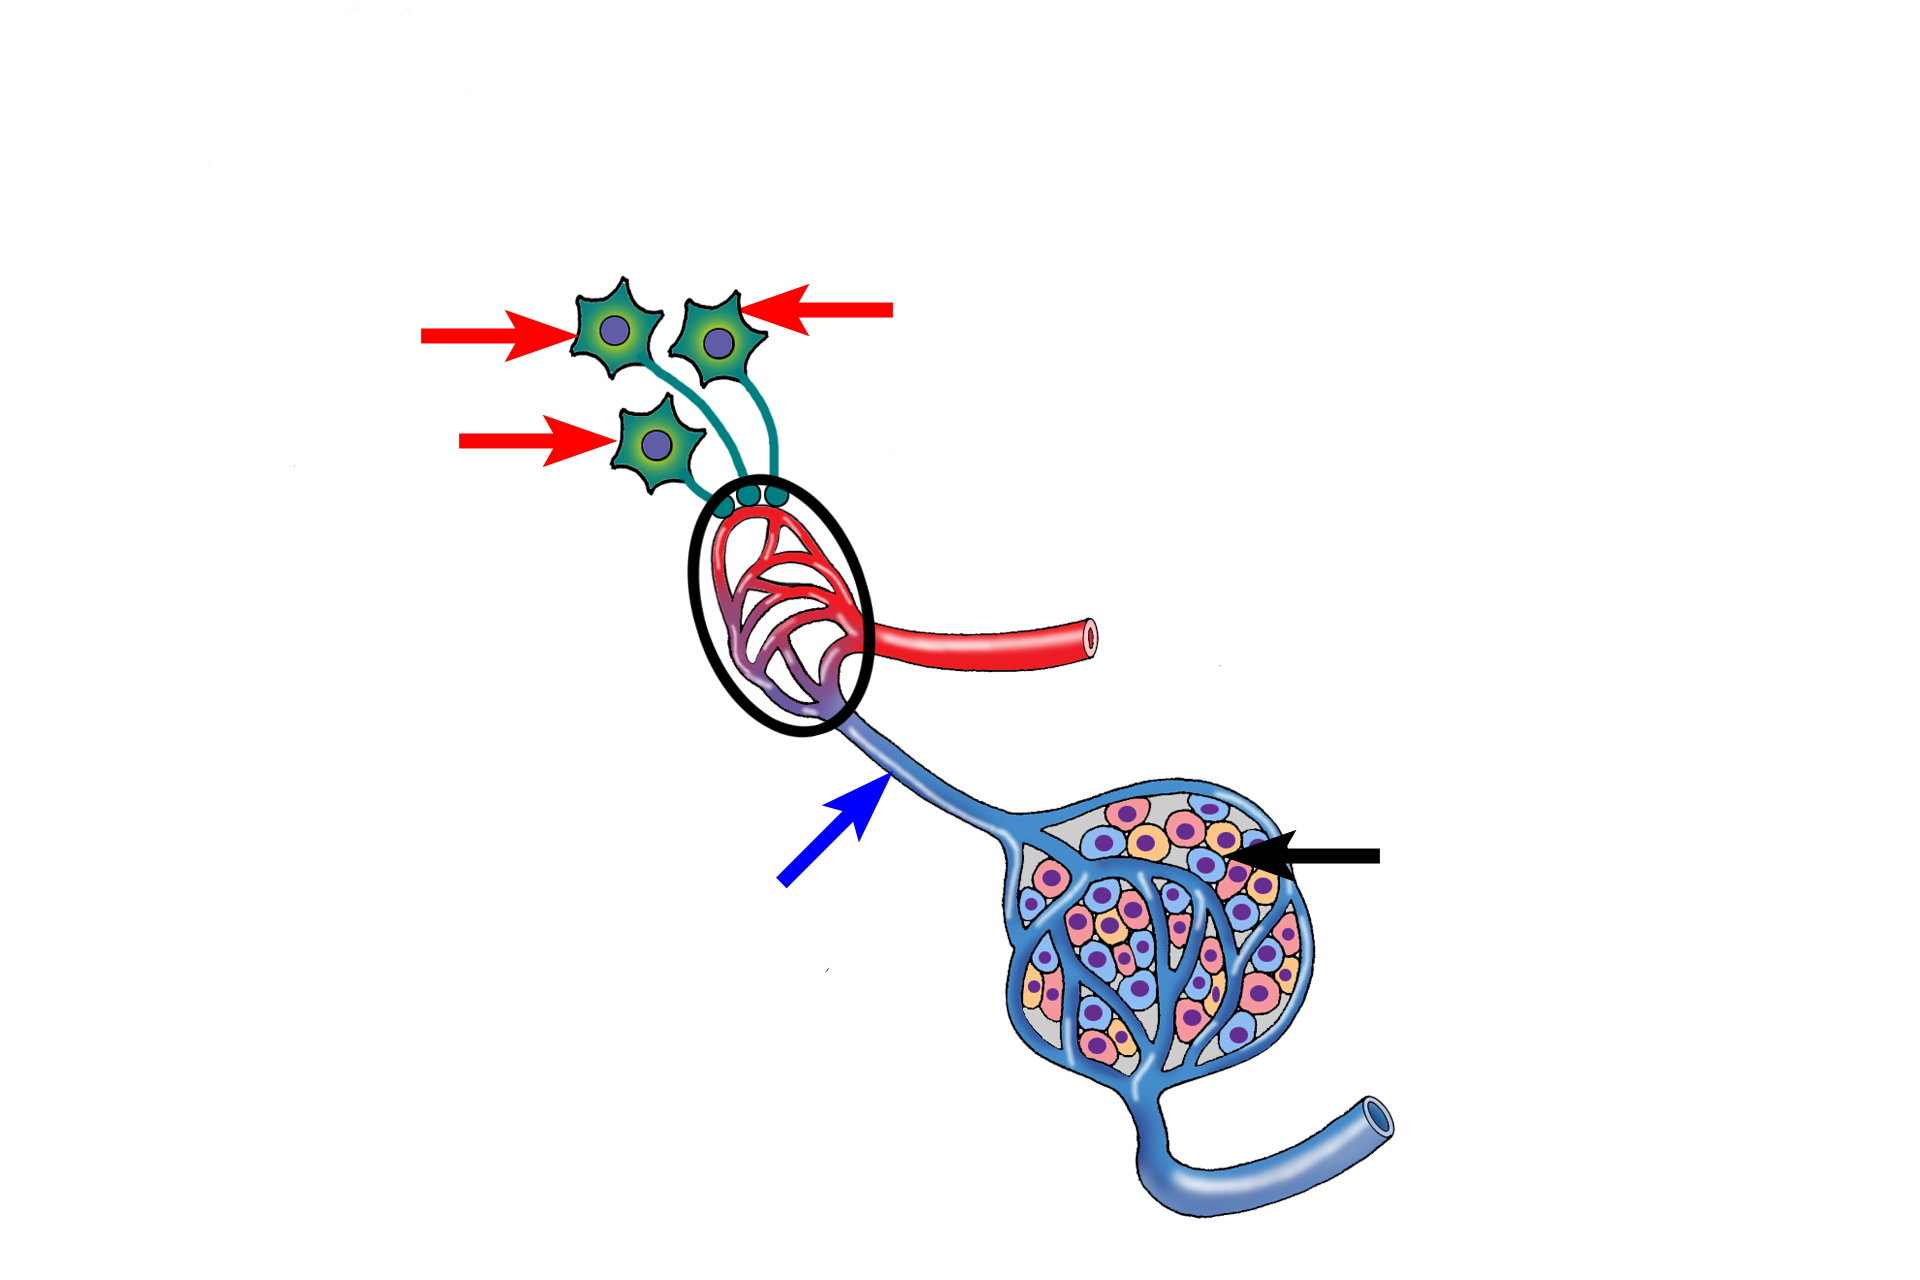  - Control of secretion > <p>Neurons (red arrows) in hypothalamic nuclei terminate on a capillary plexus (black circle) in the median eminence of the hypothalamus. Stimulating and inhibiting factors synthesized by these neurons are released into the capillary plexus and carried via the hypothalamo-hypophyseal portal system of vessels (blue arrow) to capillaries in the adenohypophysis, where they influence hormone secretion (black arrow).</p>
